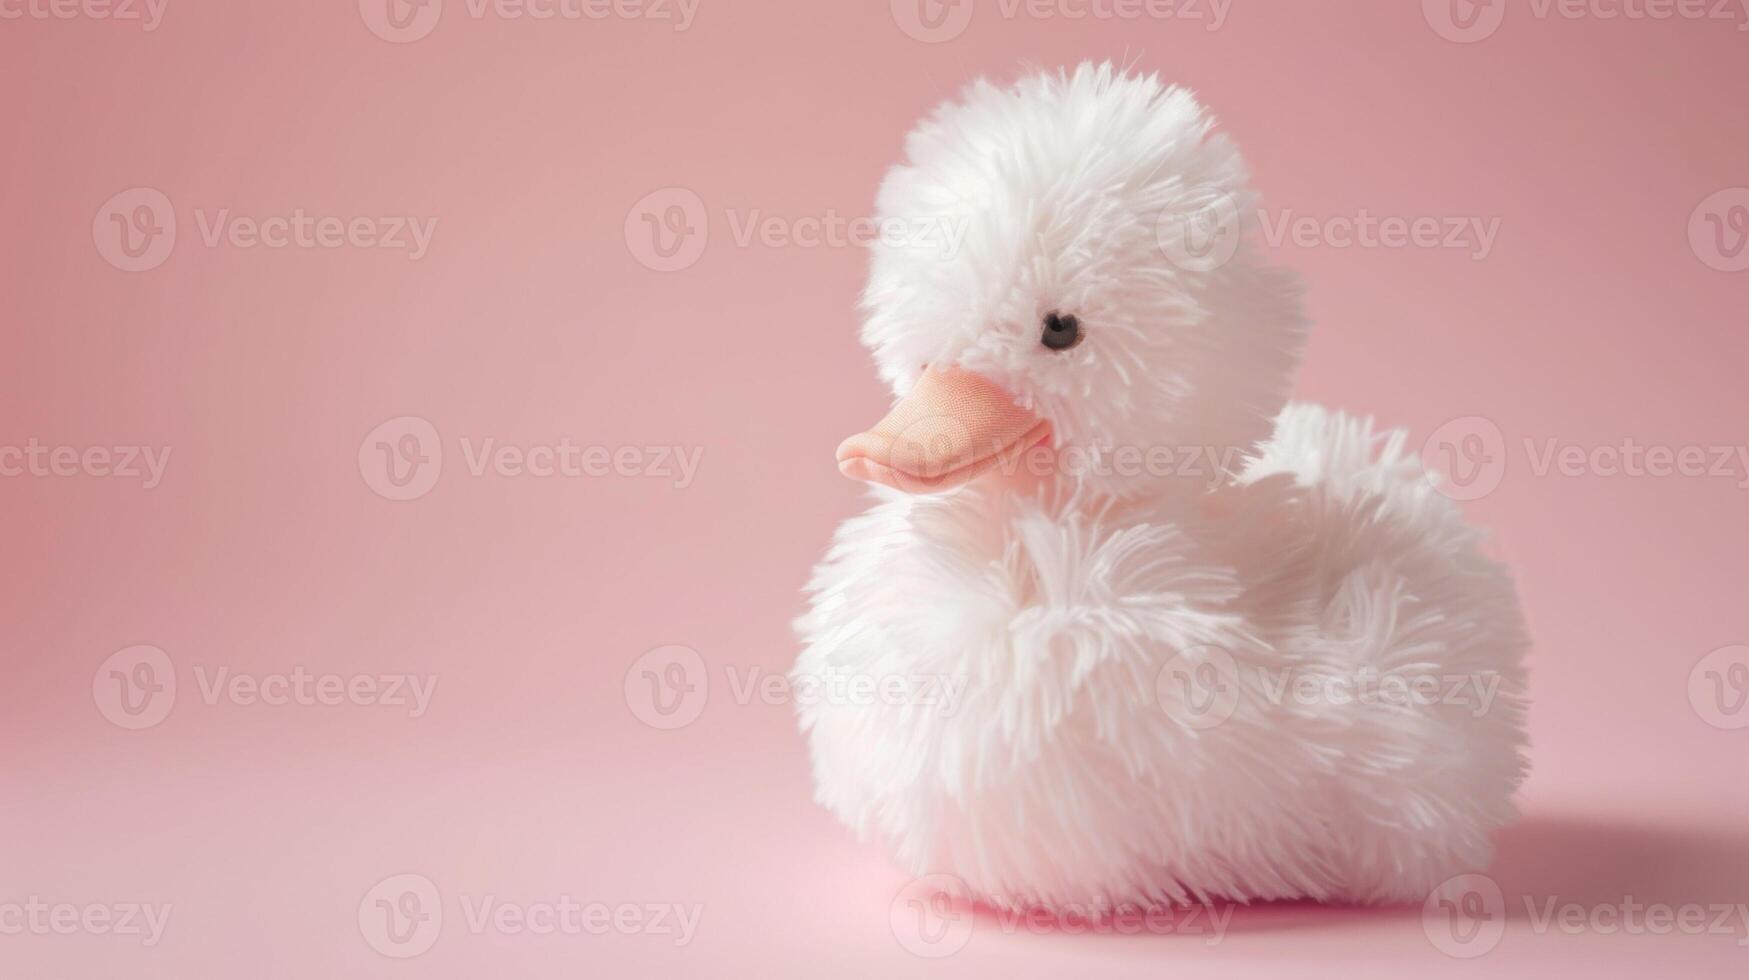 Fluffy duck toy on pink background exudes softness, playfulness and childhood innocence photo